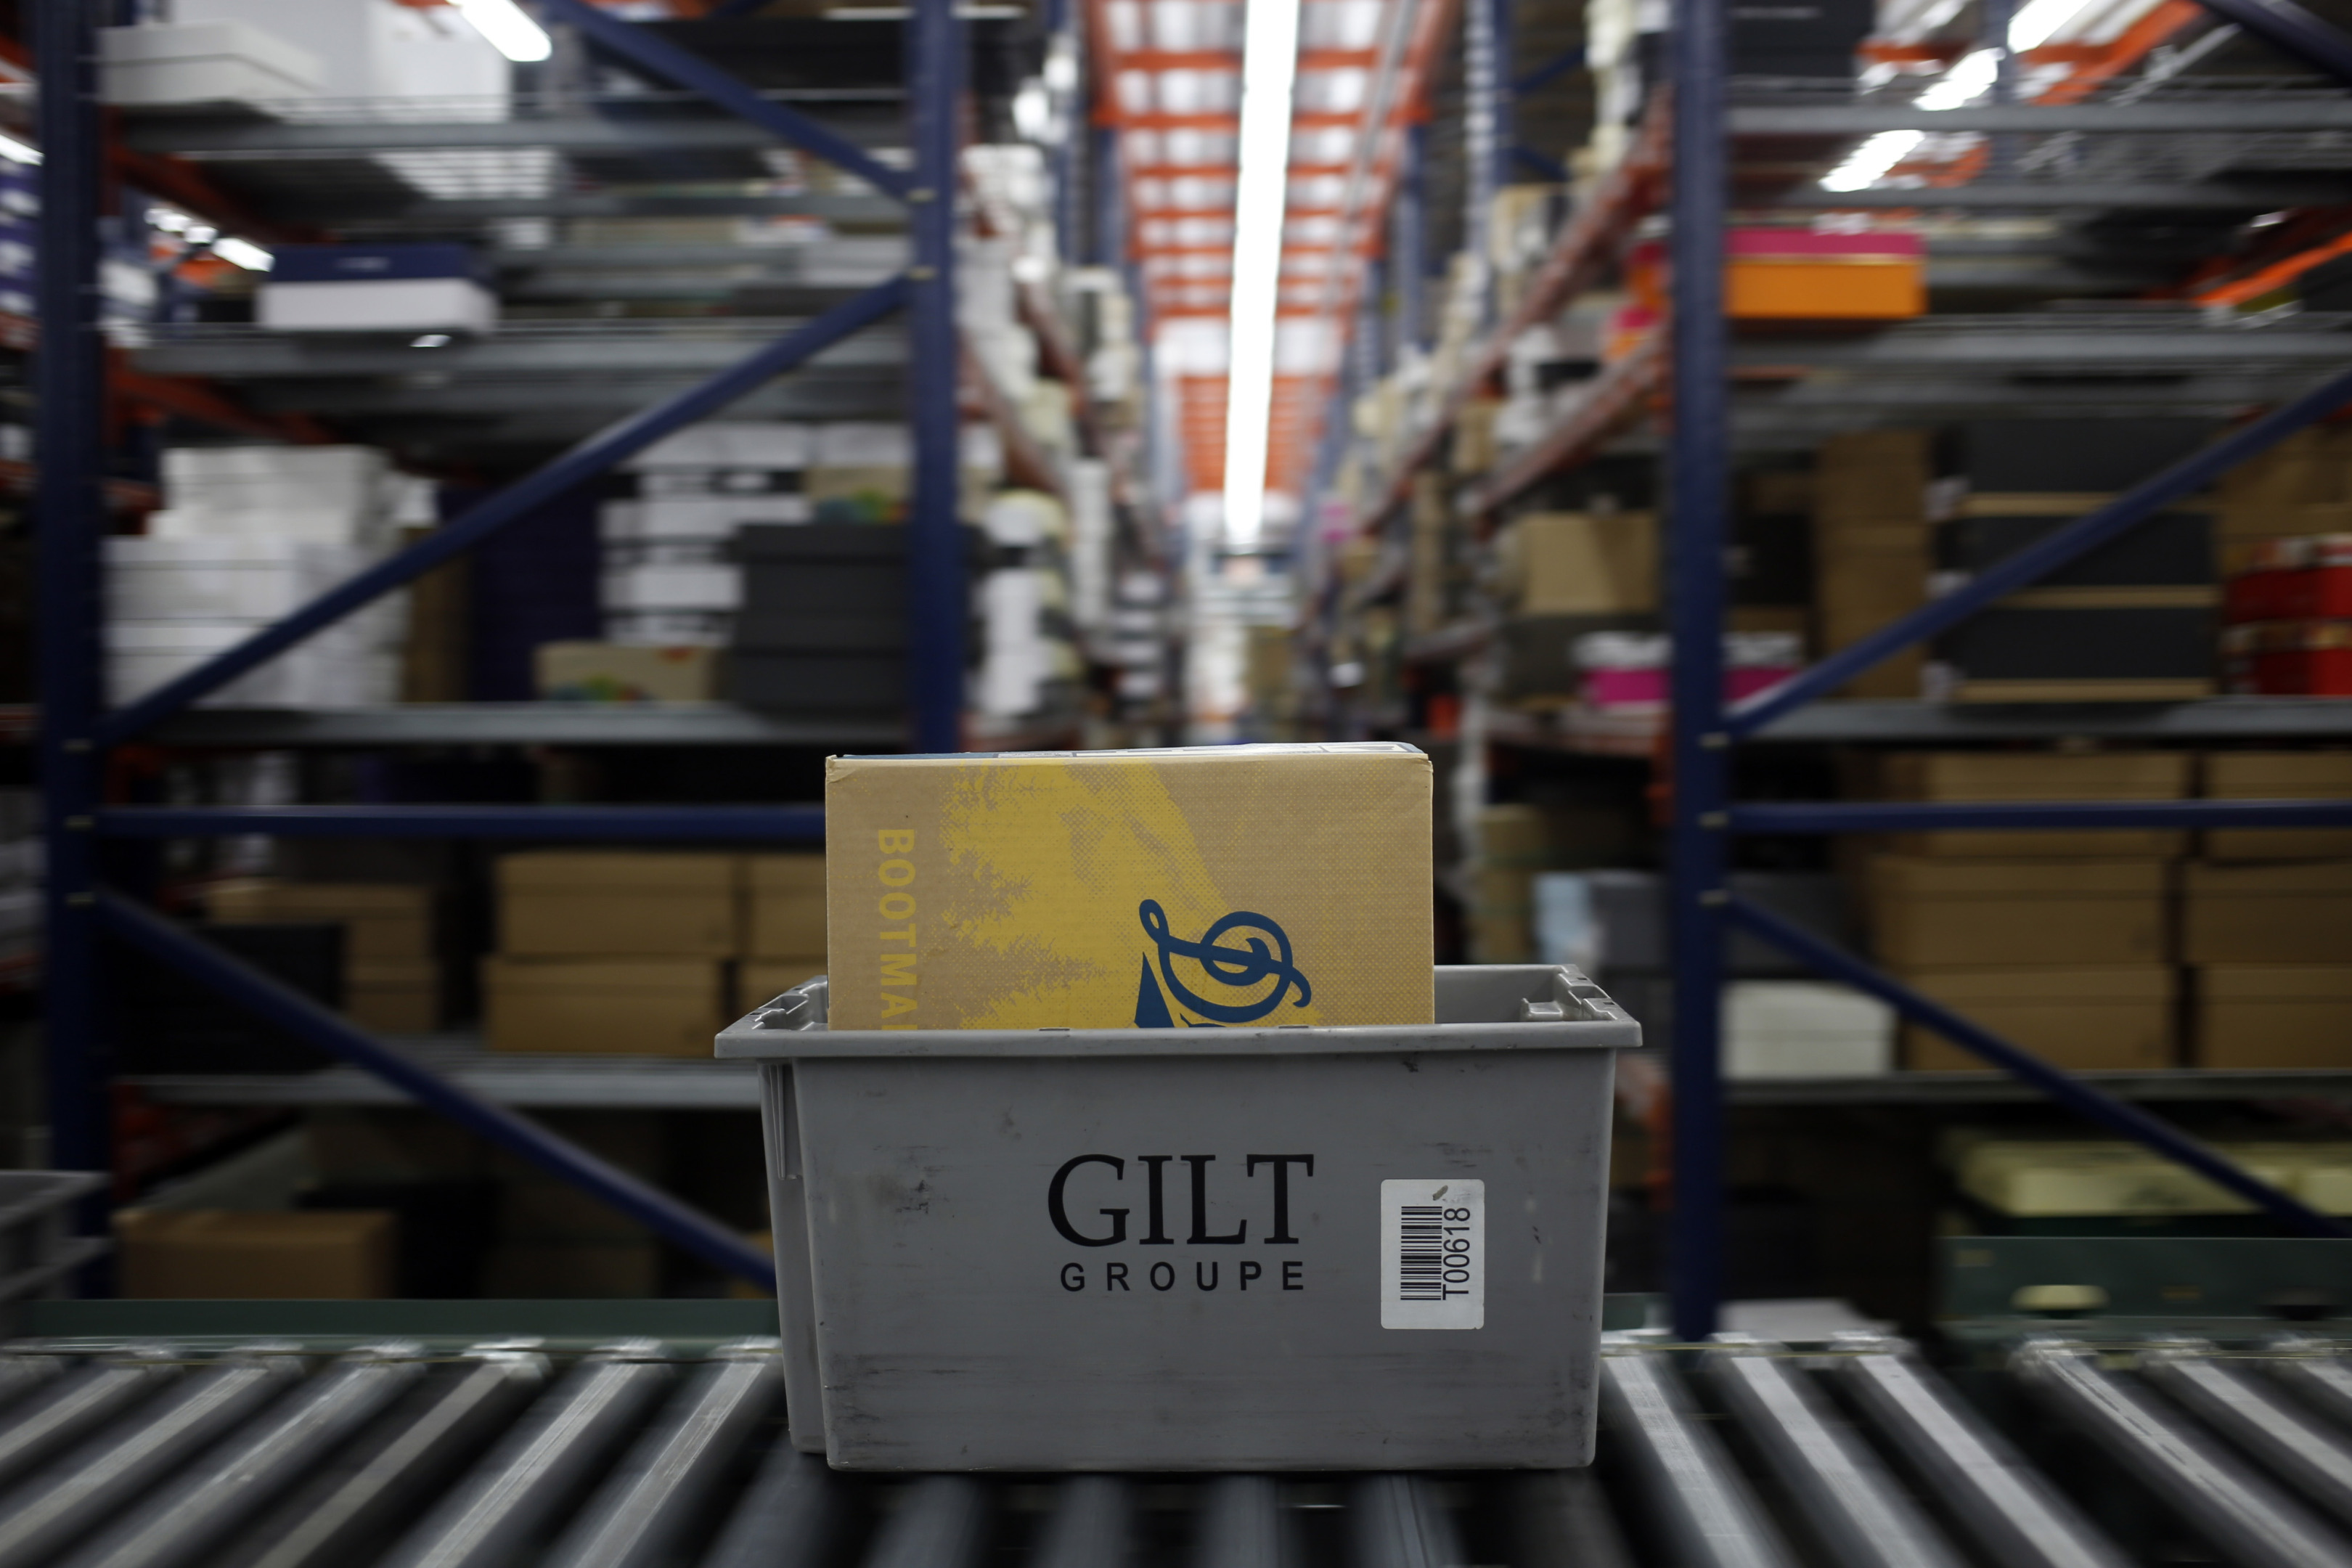 Saks Fifth Avenue buys Gilt to strengthen its e-commerce